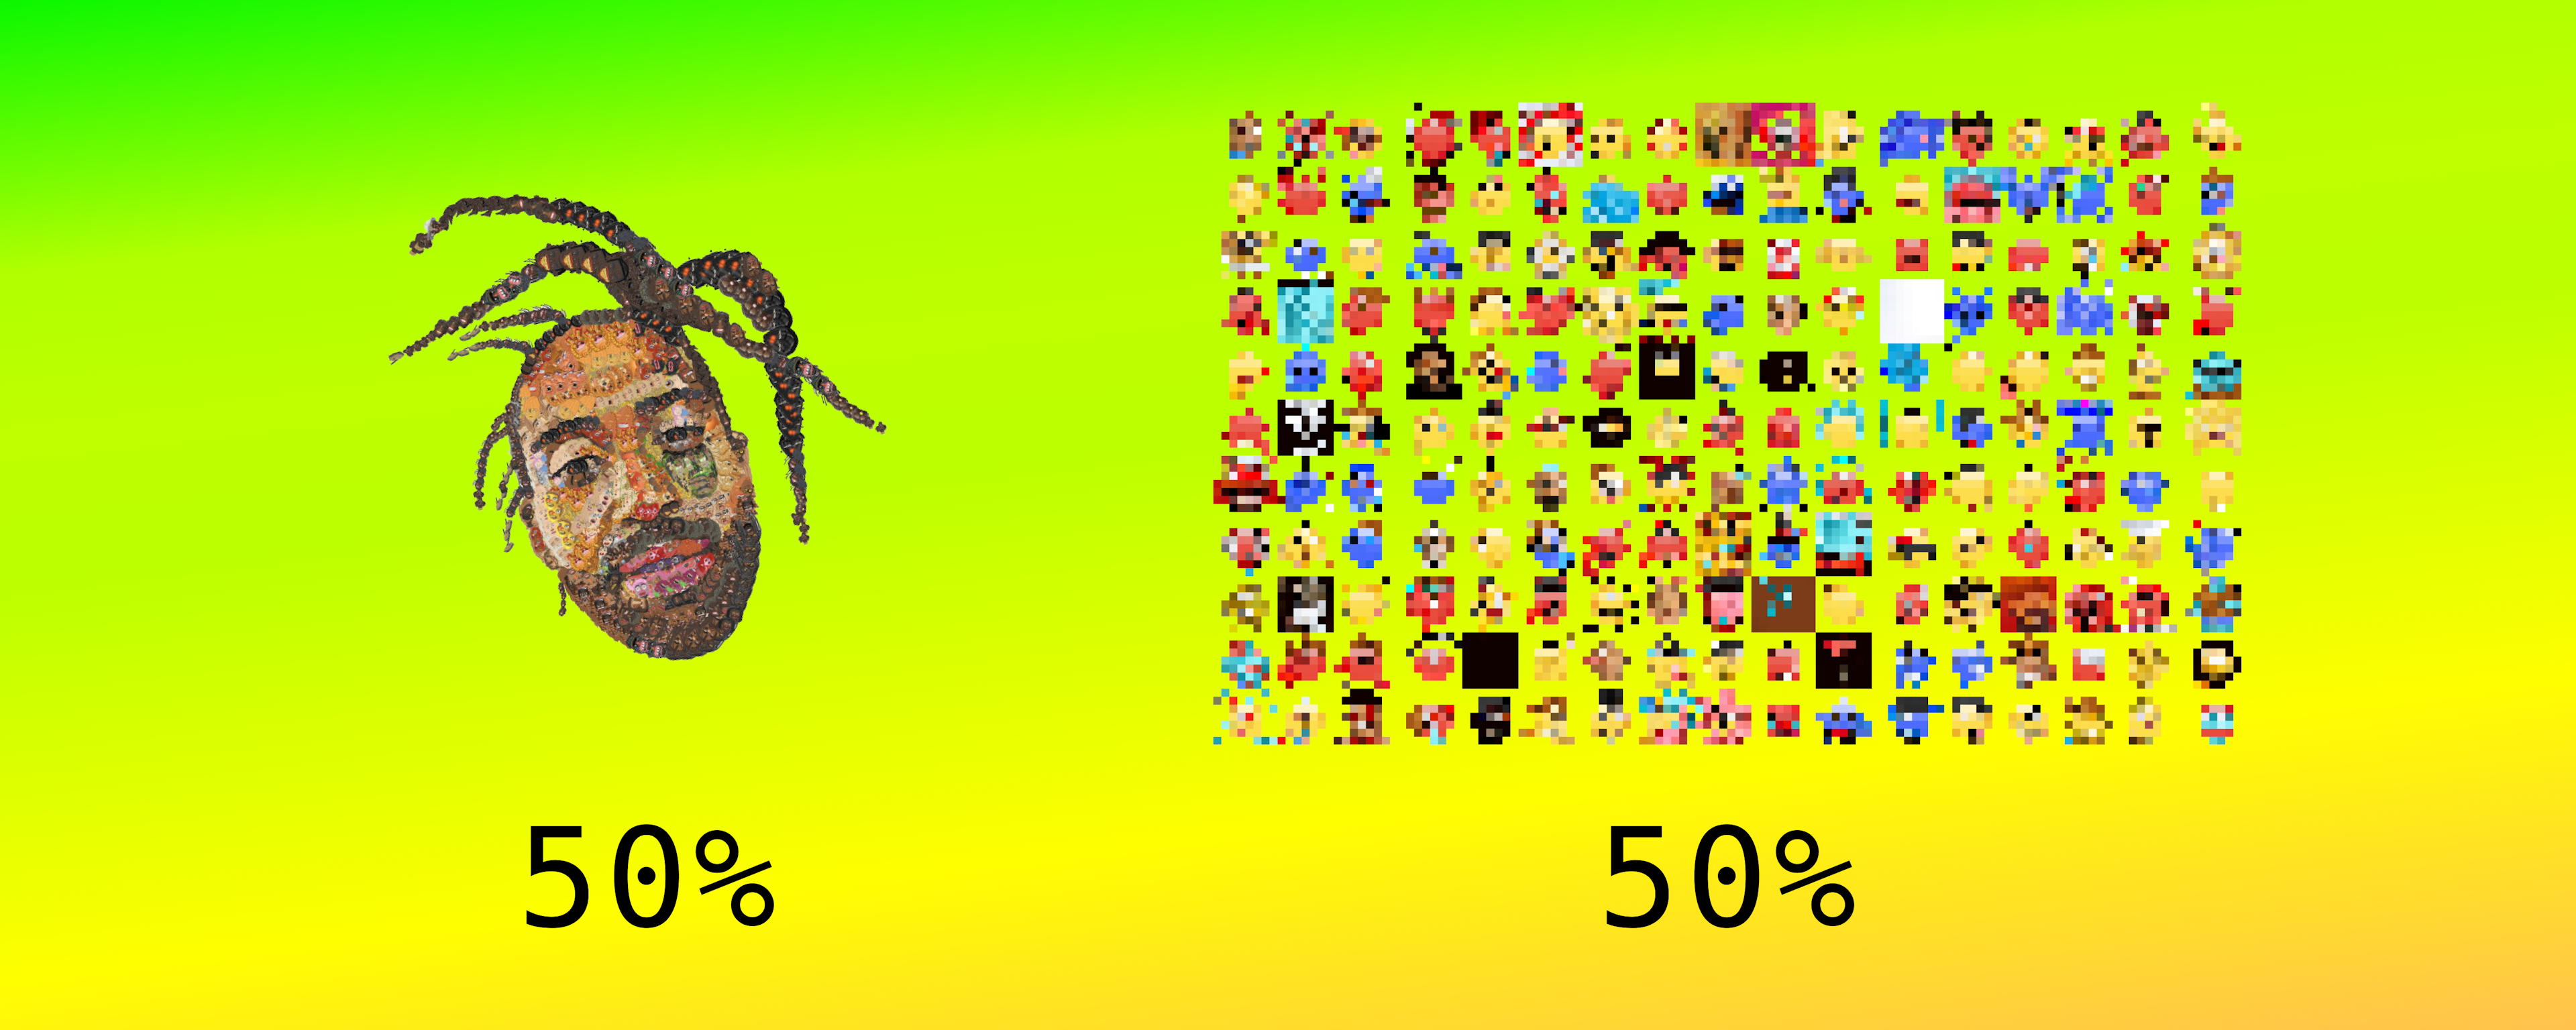 Sales divided 50% to yung jake & 50% split amongst the 187 selected Cursed Emojis